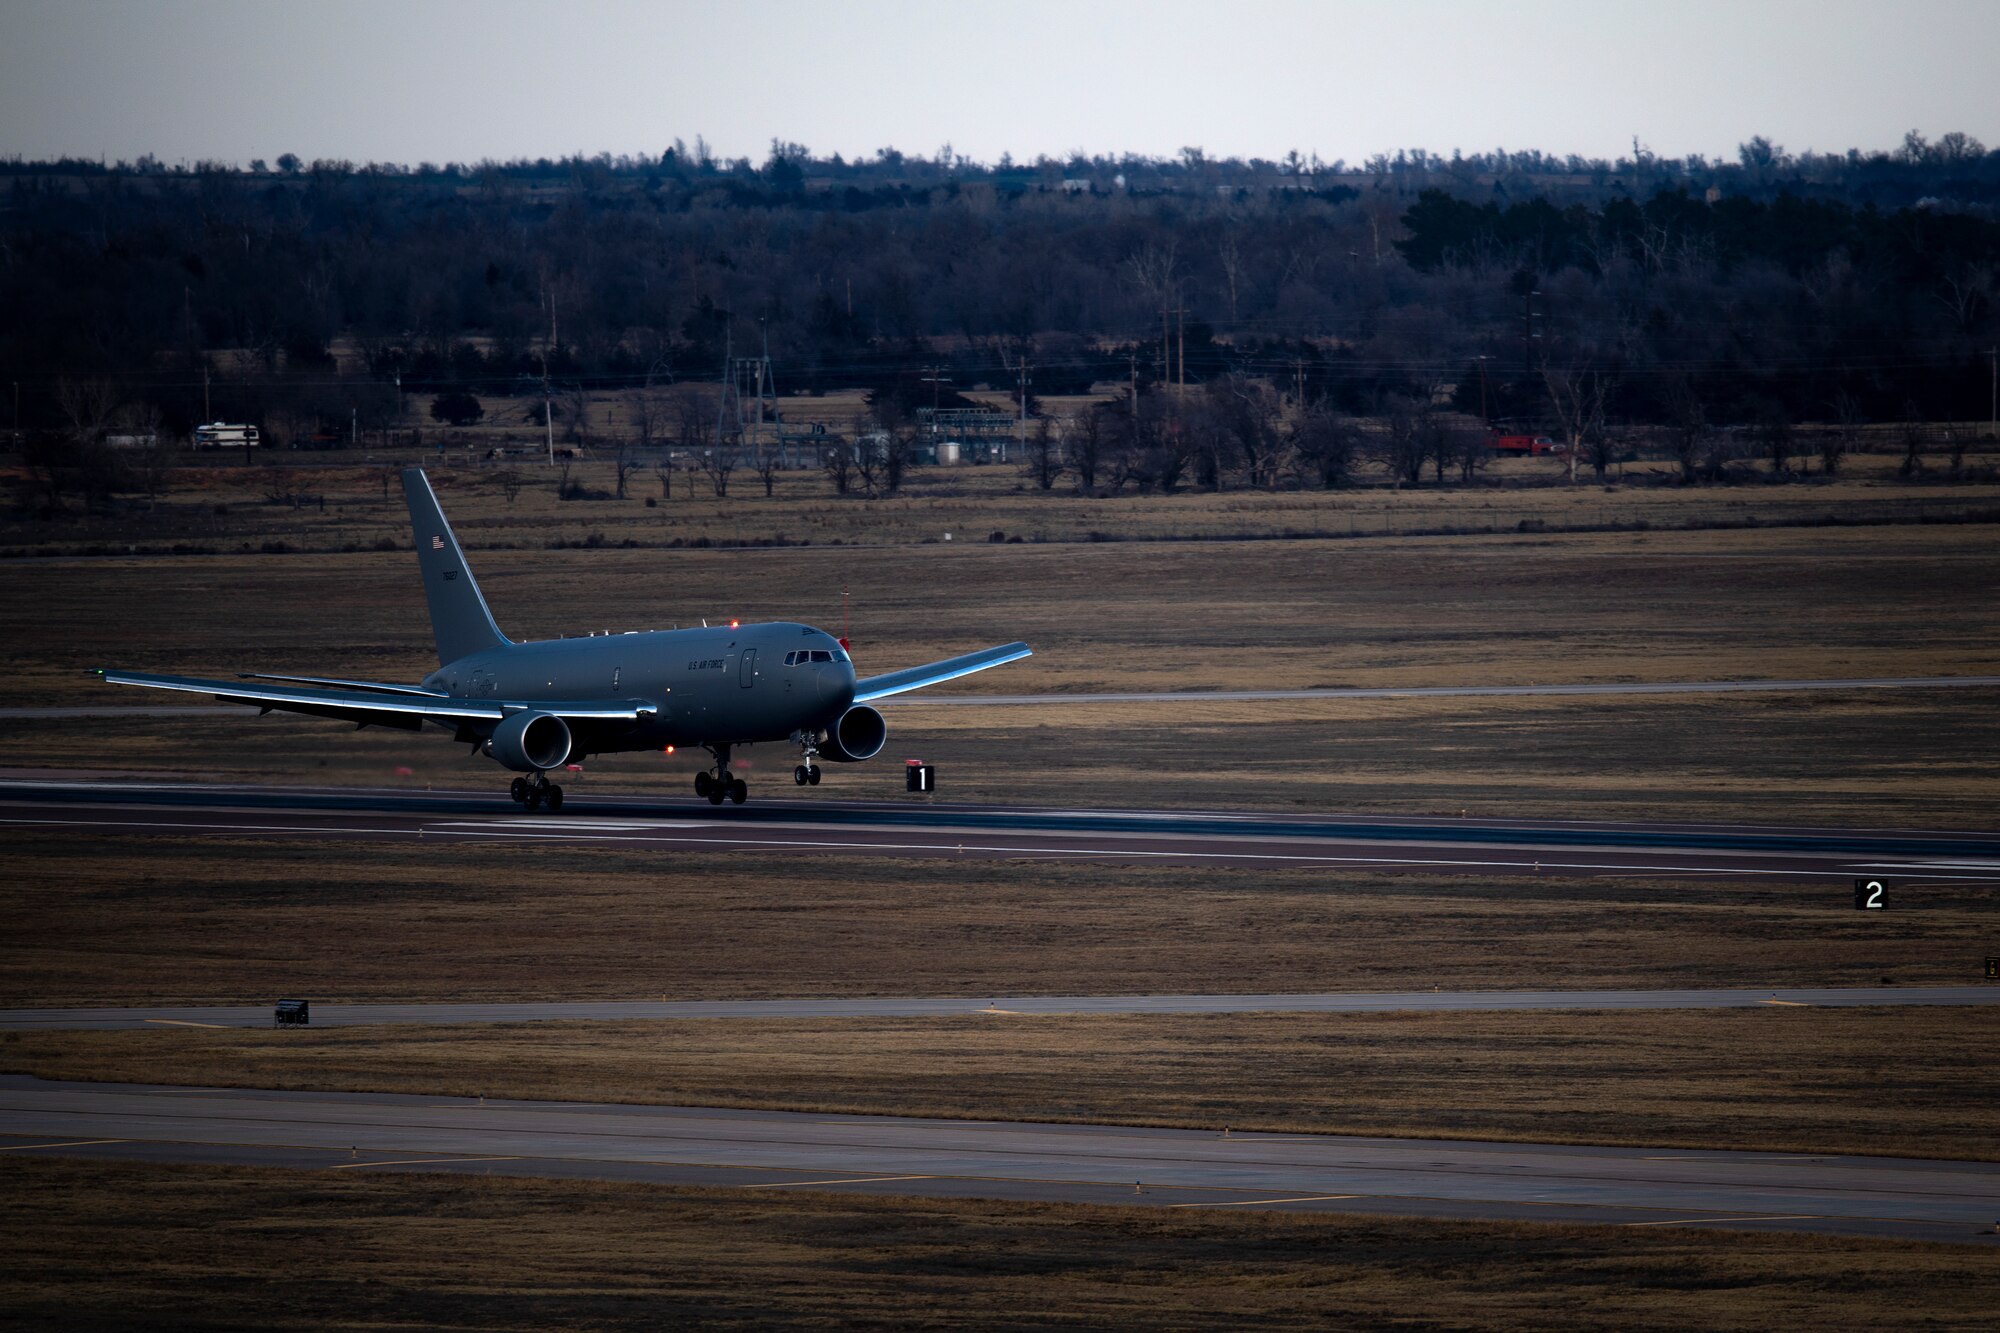 A KC-46 Pegasus lands on a runway of the 97th Air Mobility Wing for the first time Feb. 8, 2019, at Altus Air Force Base, Okla.